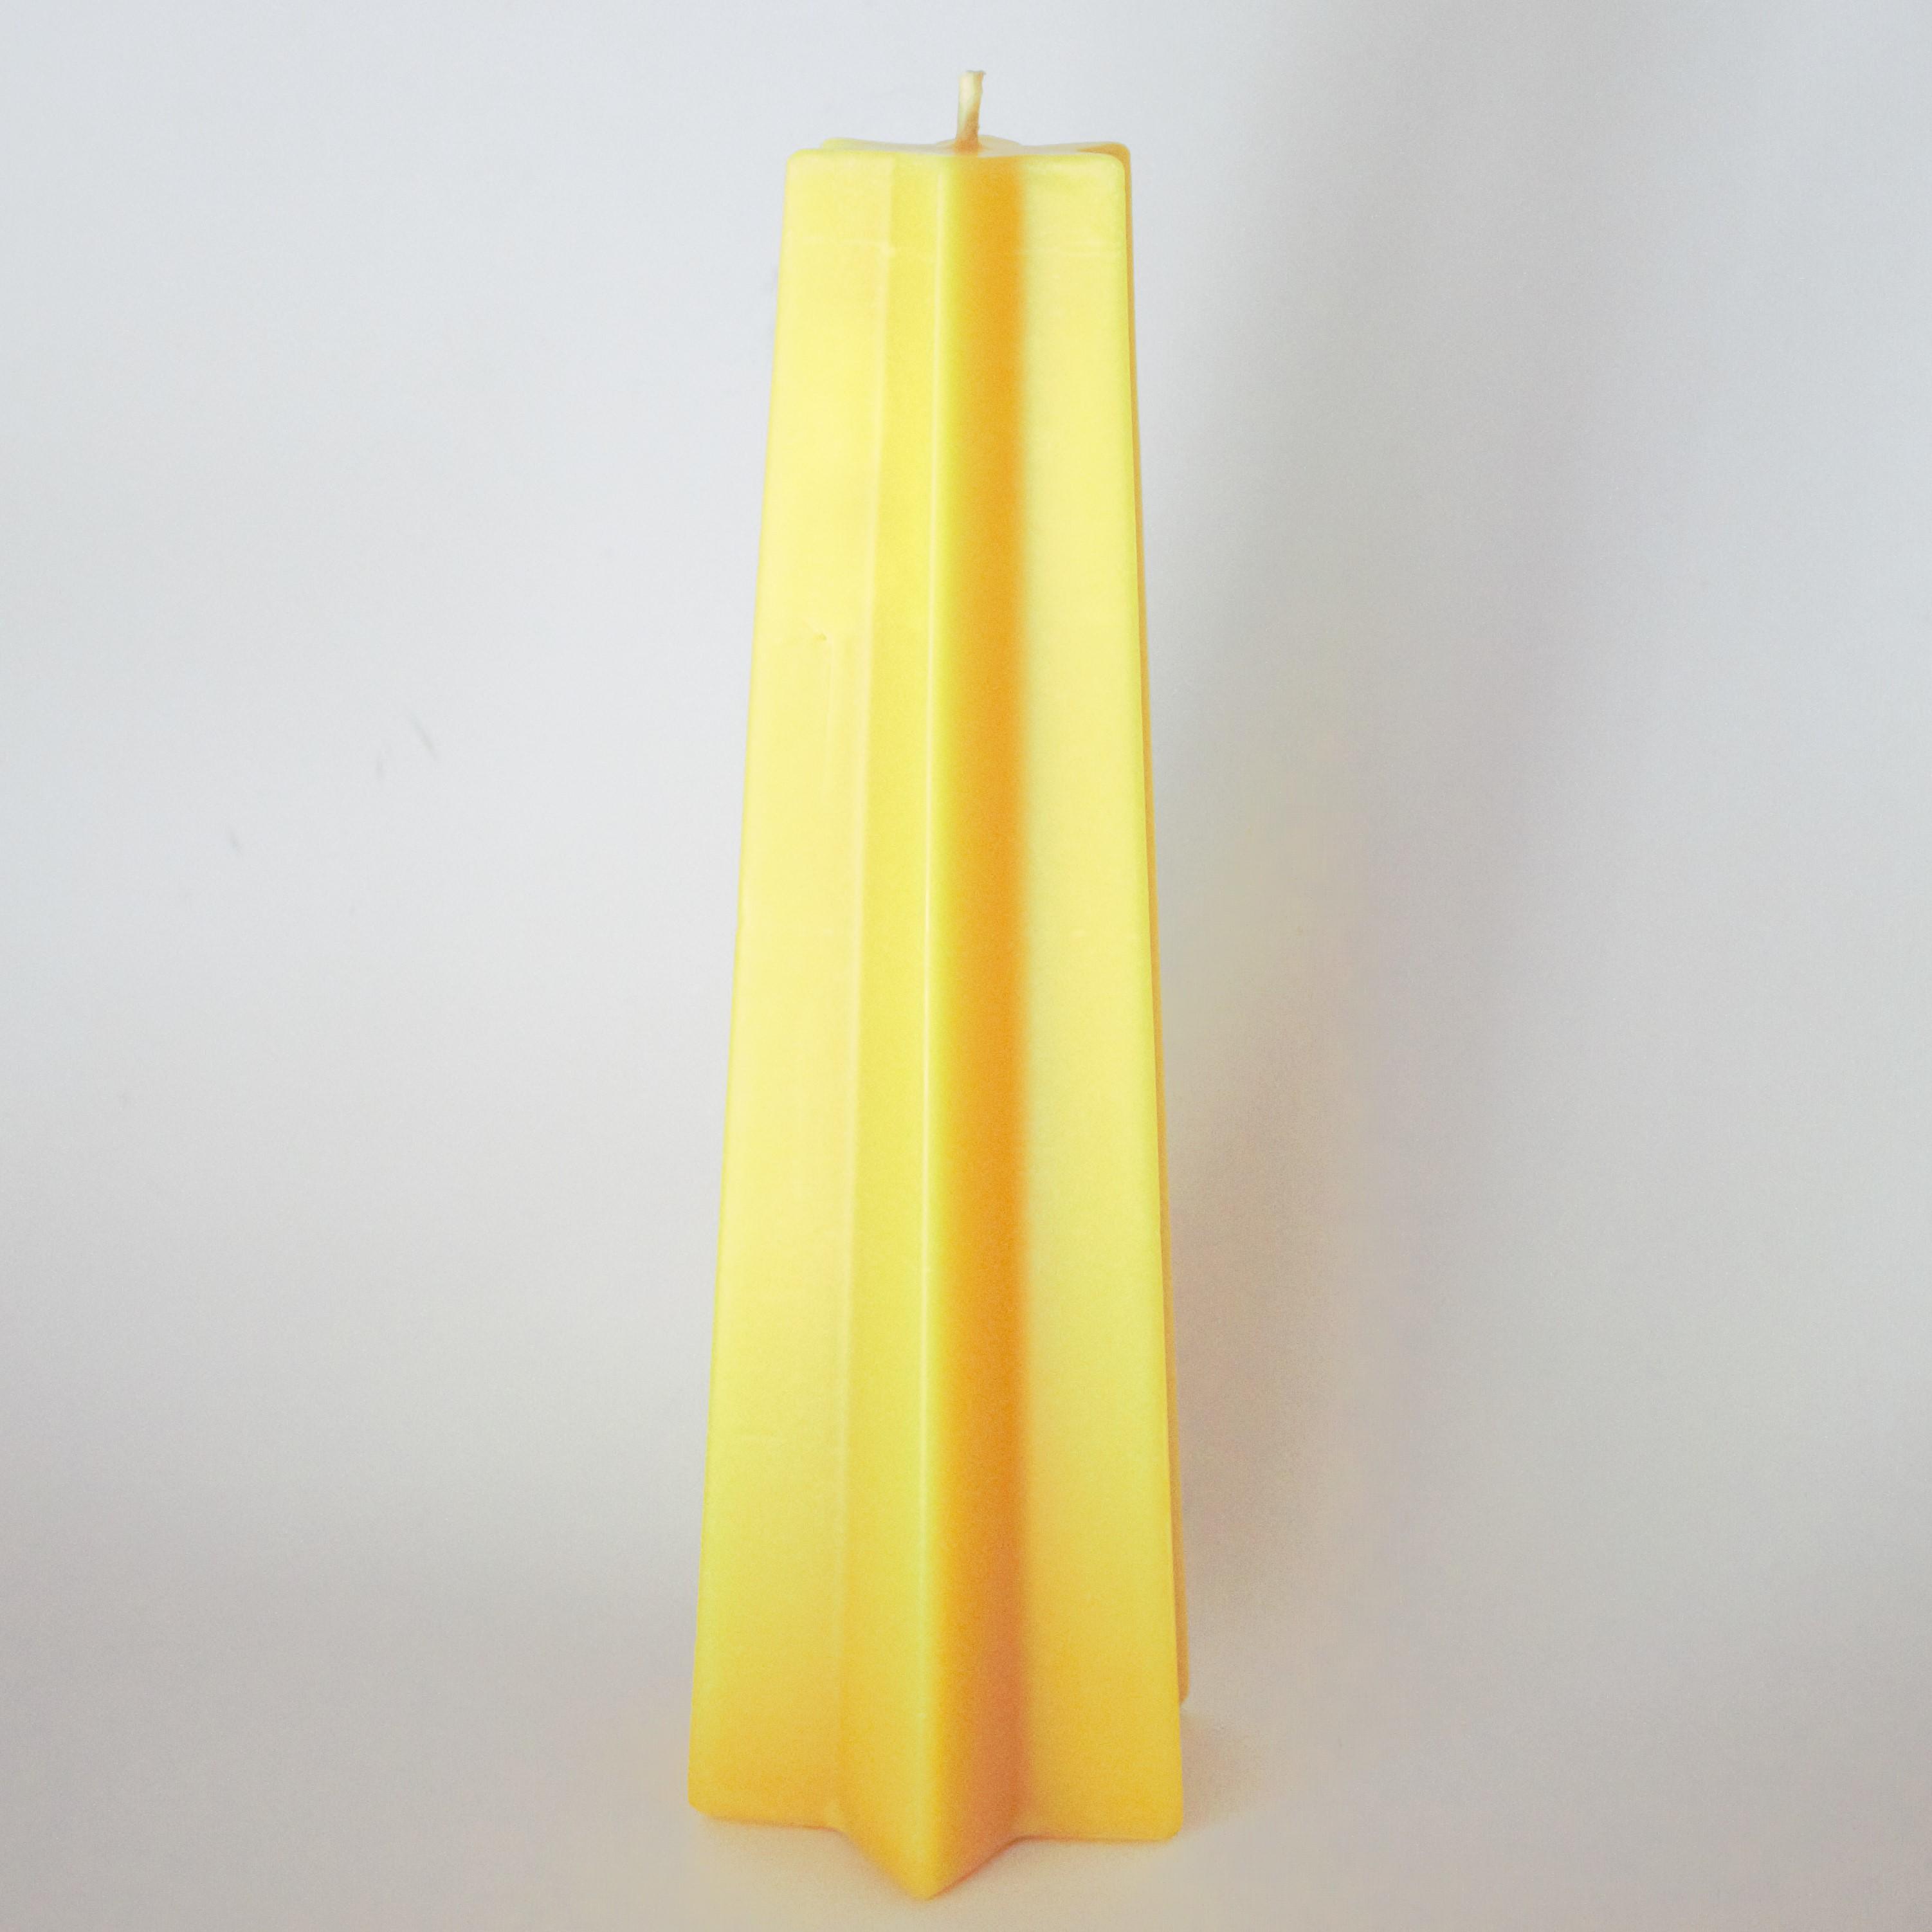 Star shaped pure beeswax pillar candle